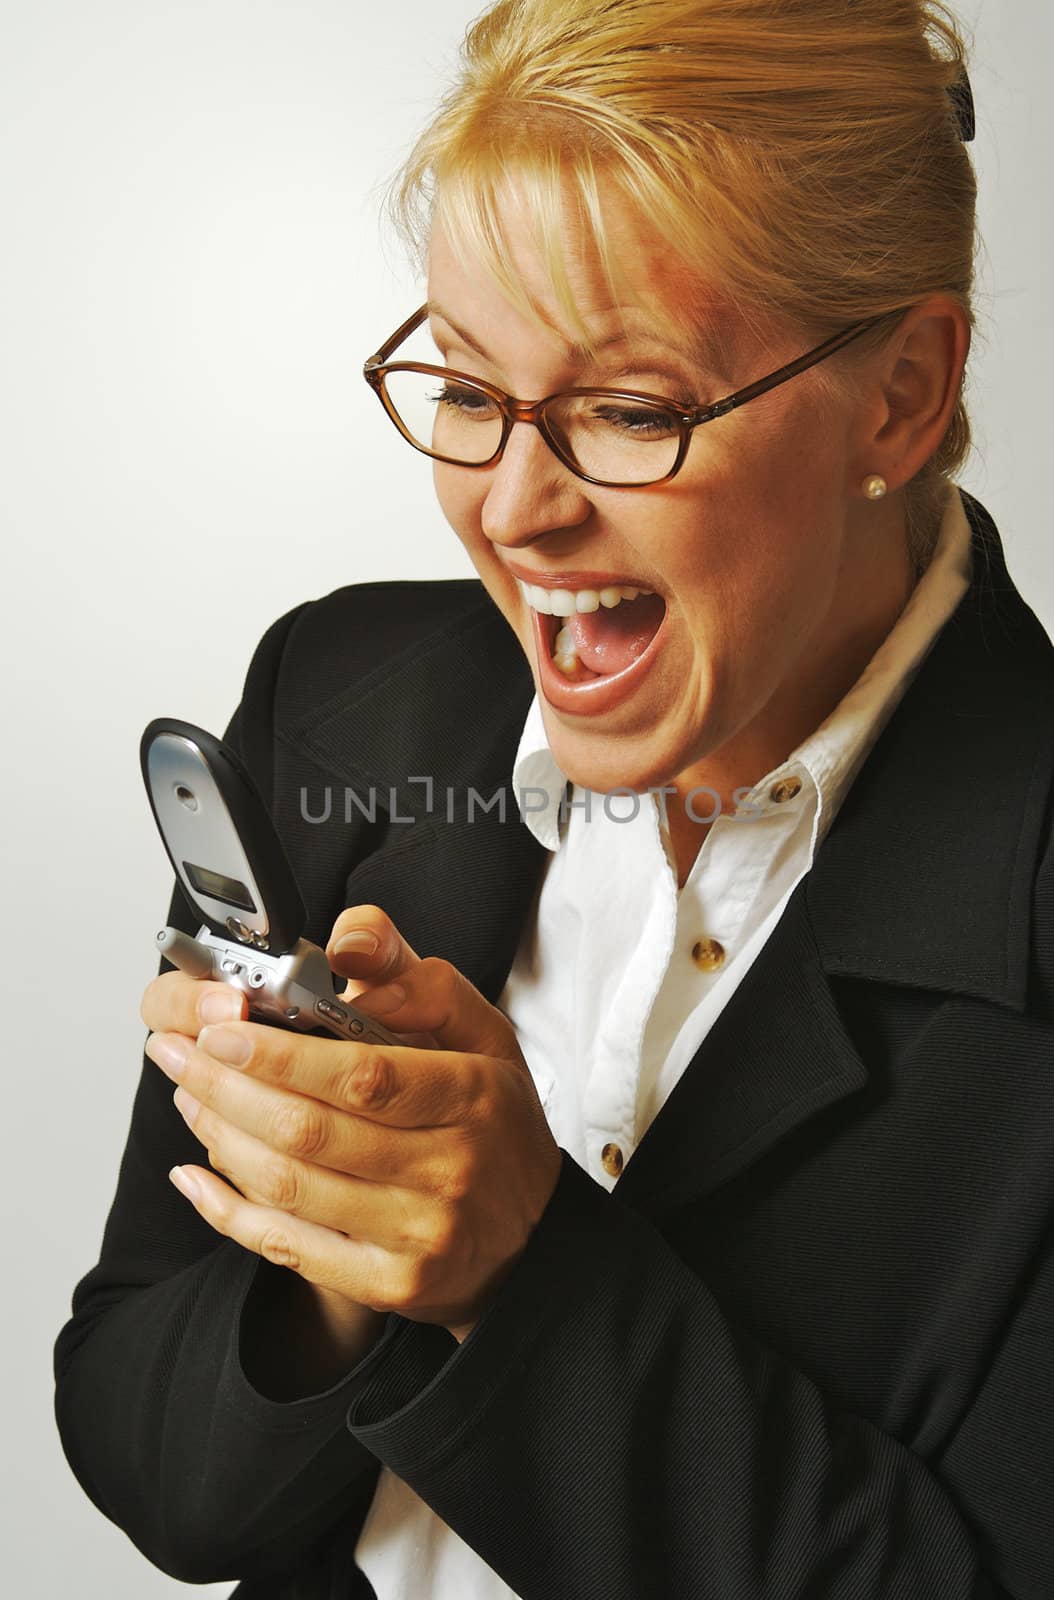 Elated Businesswoman Using Cell Phone by Feverpitched